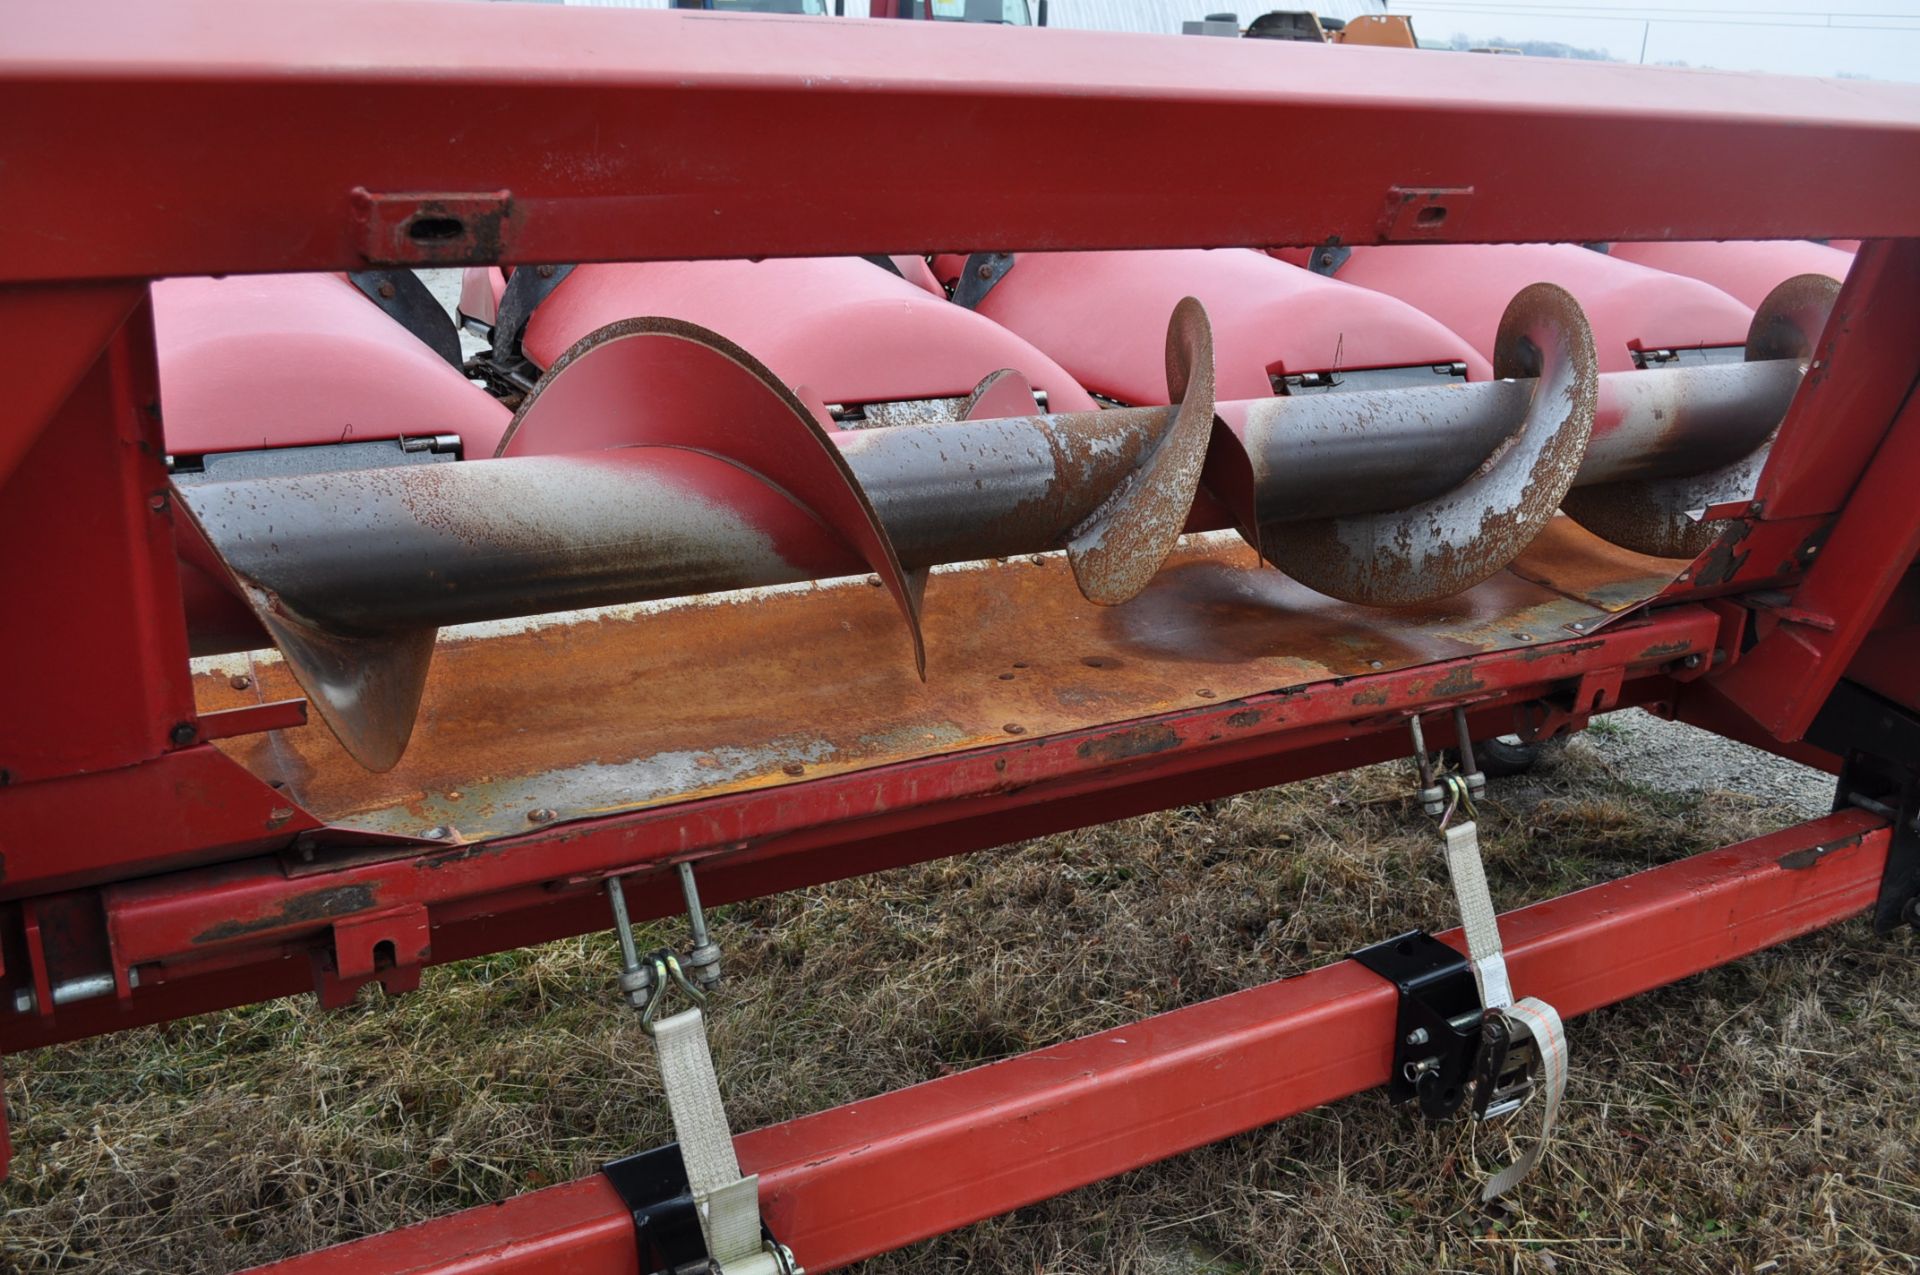 CASE IH 2208 Poly Corn Head, 8 rows x 30”, hyd deck plates, knife rolls, poly, 3 header height - Image 7 of 16